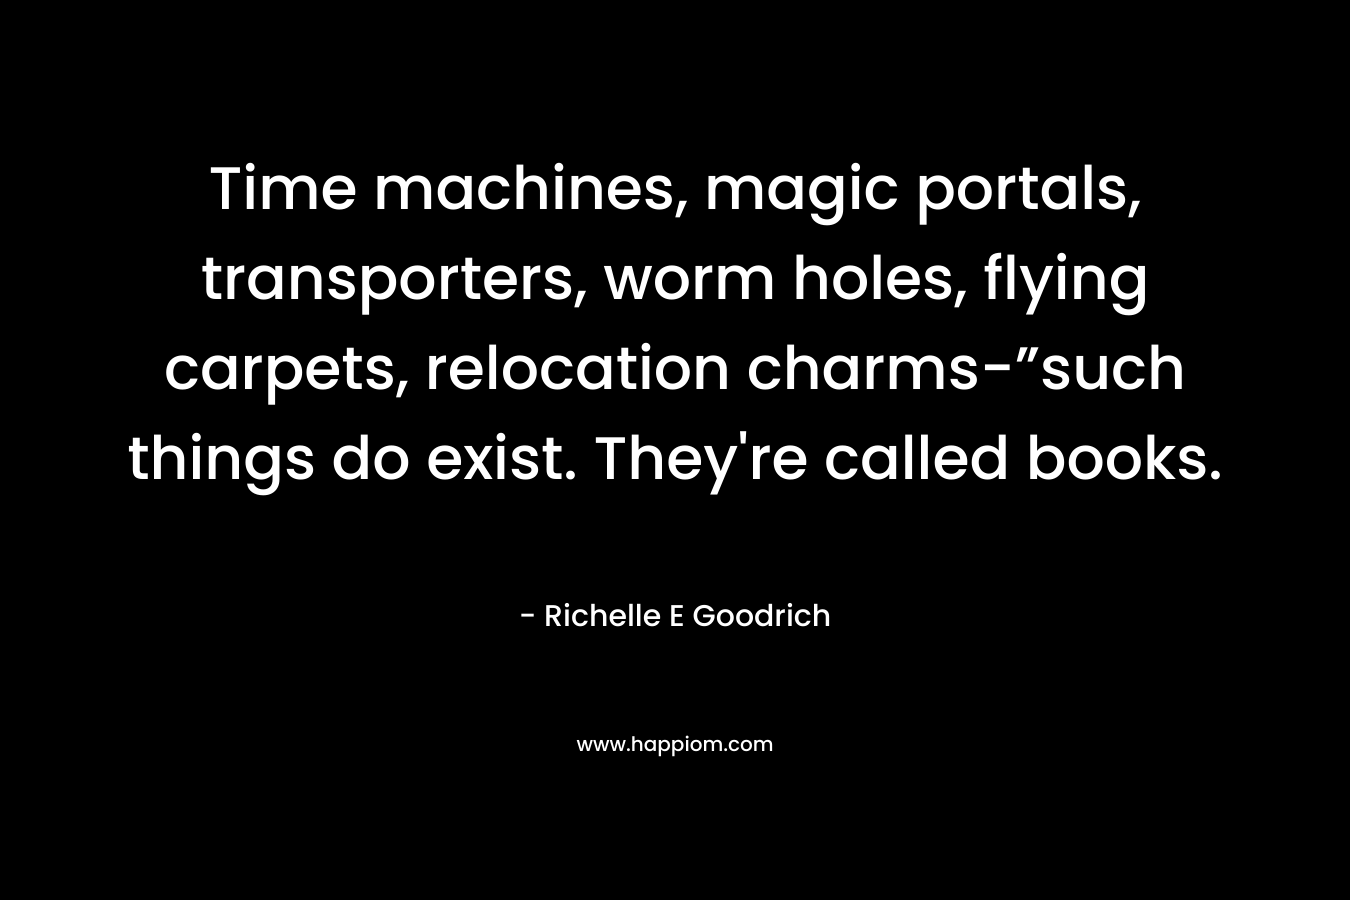 Time machines, magic portals, transporters, worm holes, flying carpets, relocation charms-”such things do exist. They’re called books. – Richelle E Goodrich